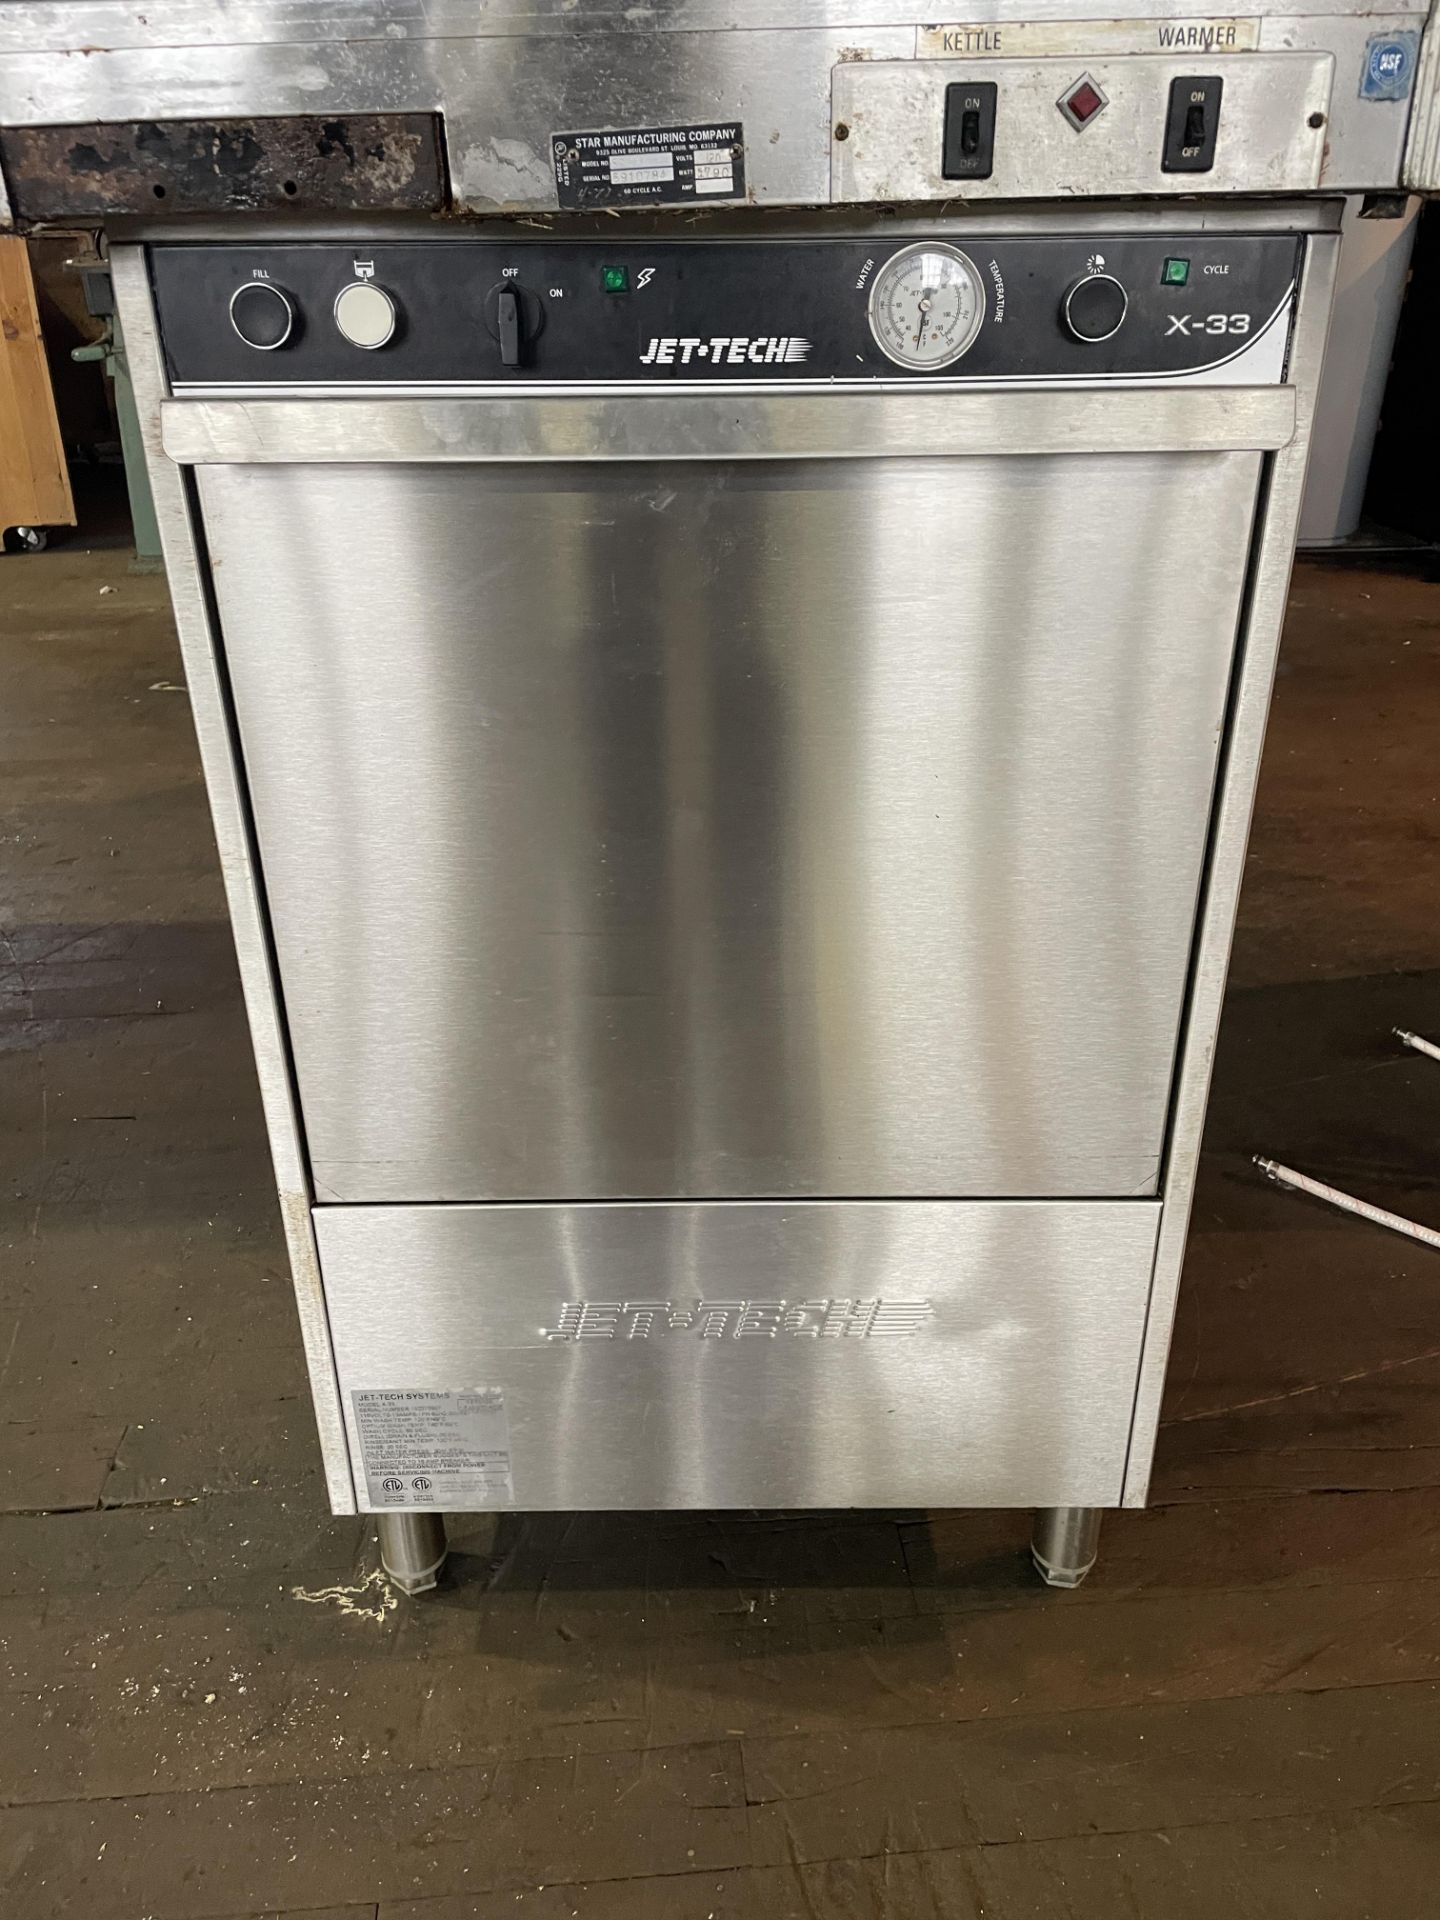 Jet Tech X33 Under Counter SS Glass Washer (Located in Winchendon) (Old Lot 212)